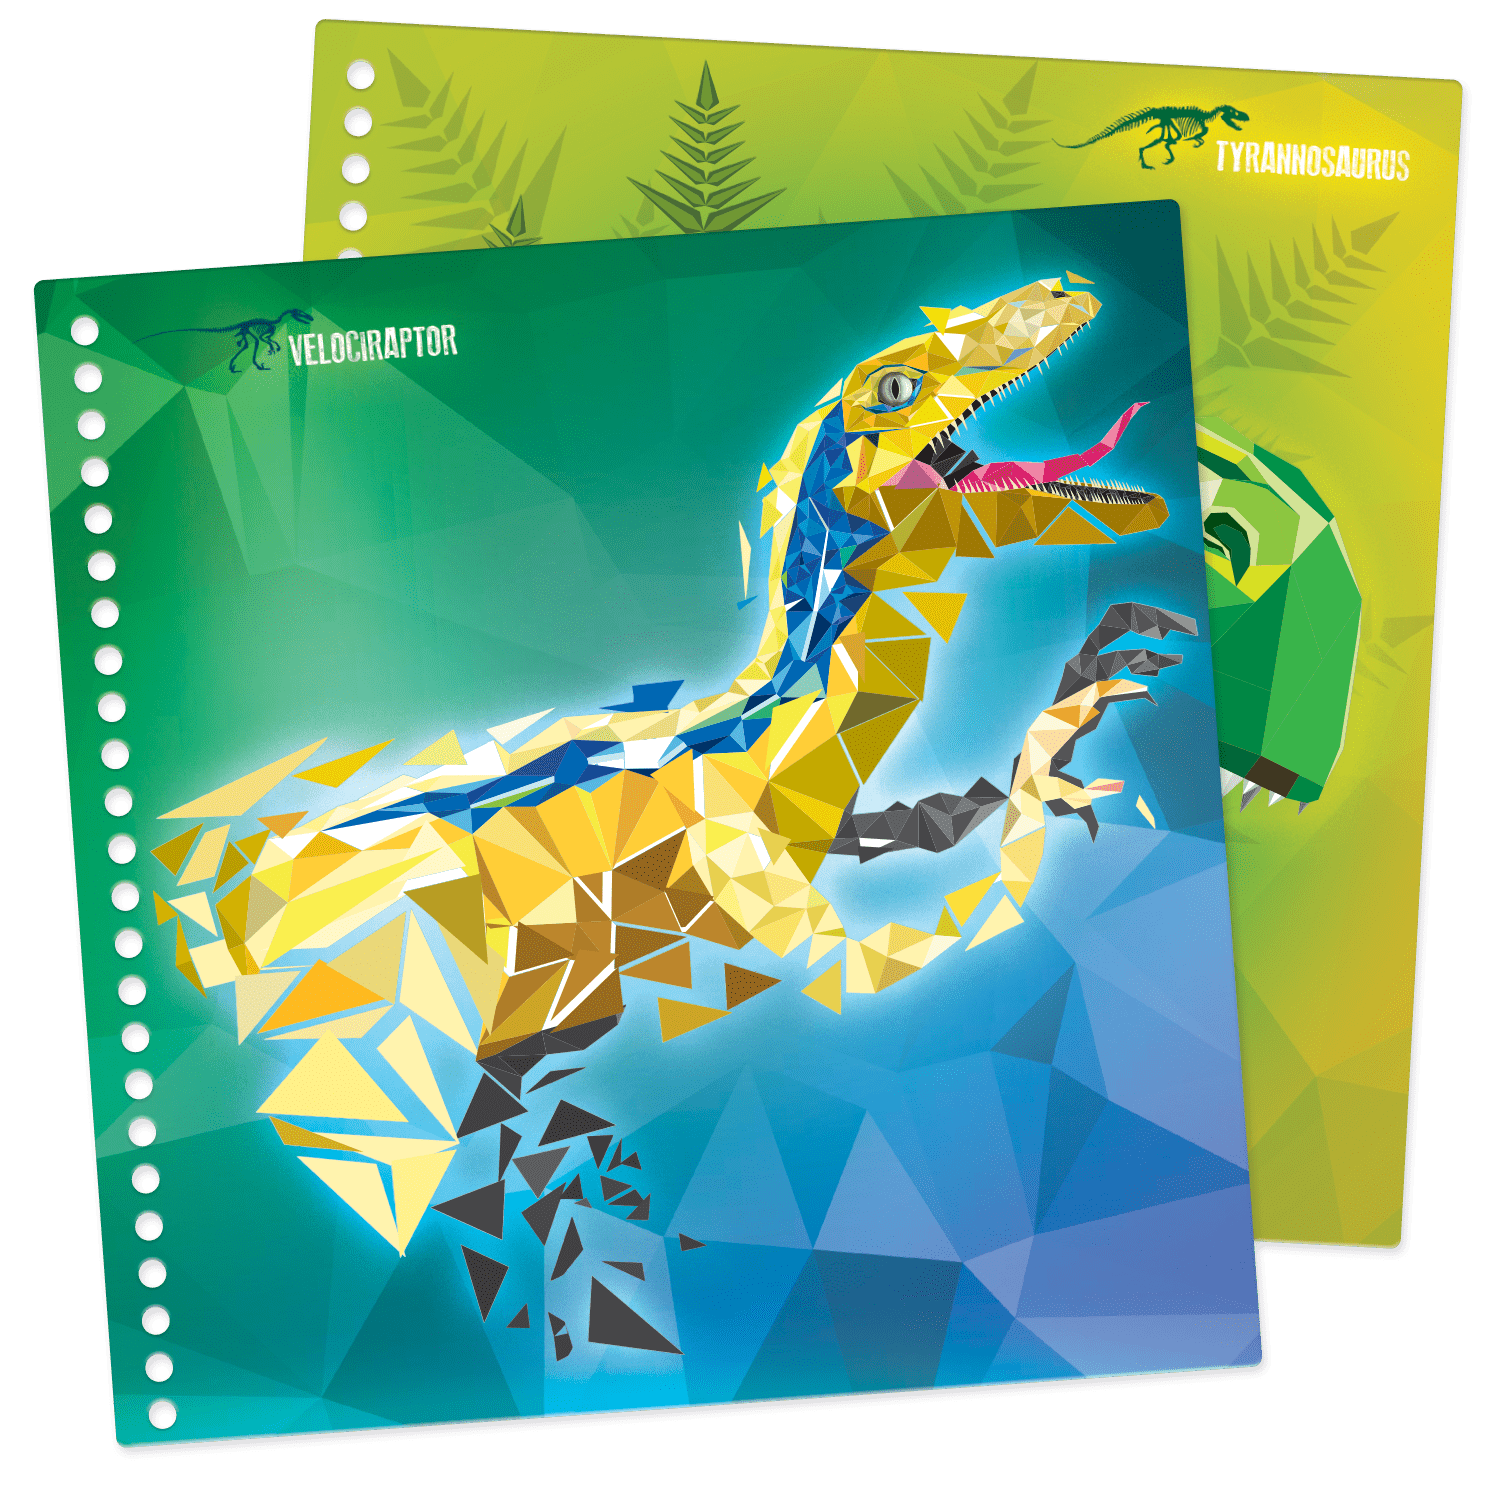 Dinosart Toys Creative Book - Sticker by Numbers